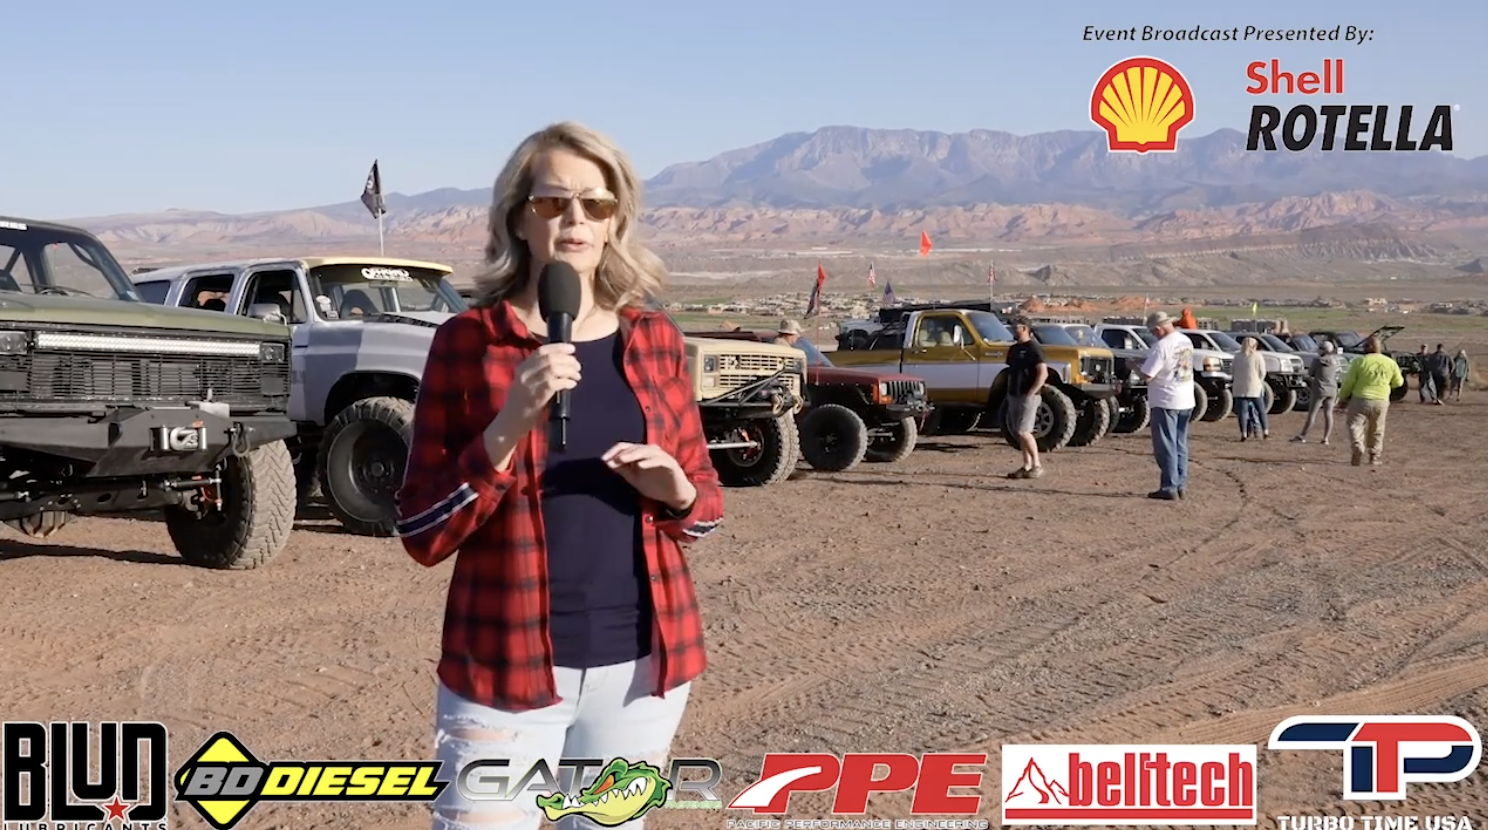 Complete live stream coverage from Full-size Invasion in Sand Hollow Utah! Presented by Shell Rotella